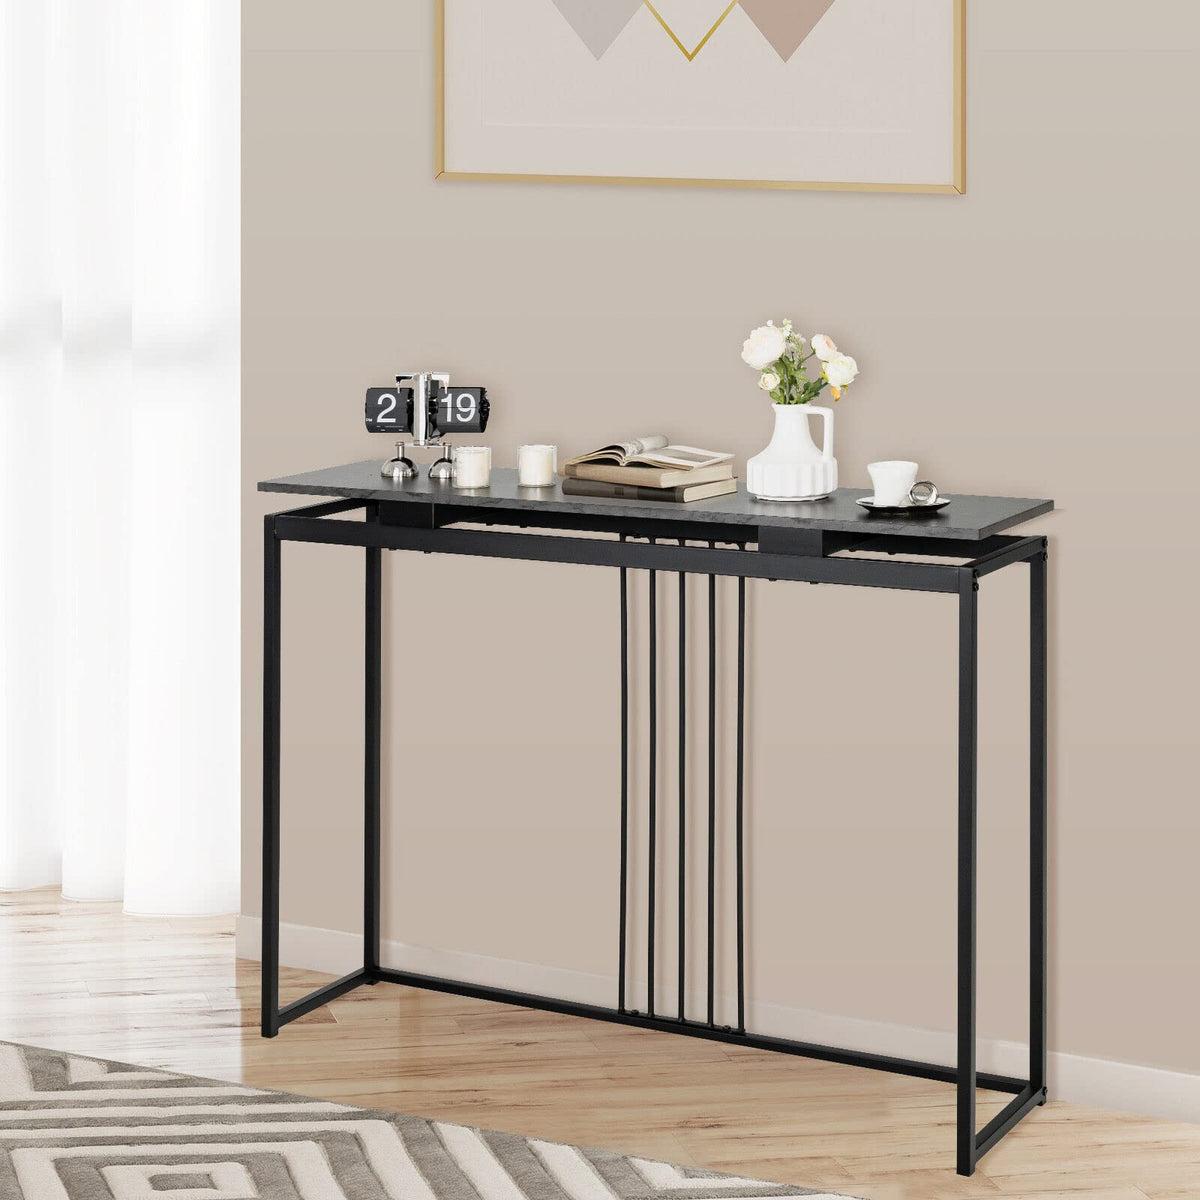 Giantex Faux Marble Console Table, Sofa Table w/Powder-Coated Steel Frame, Black